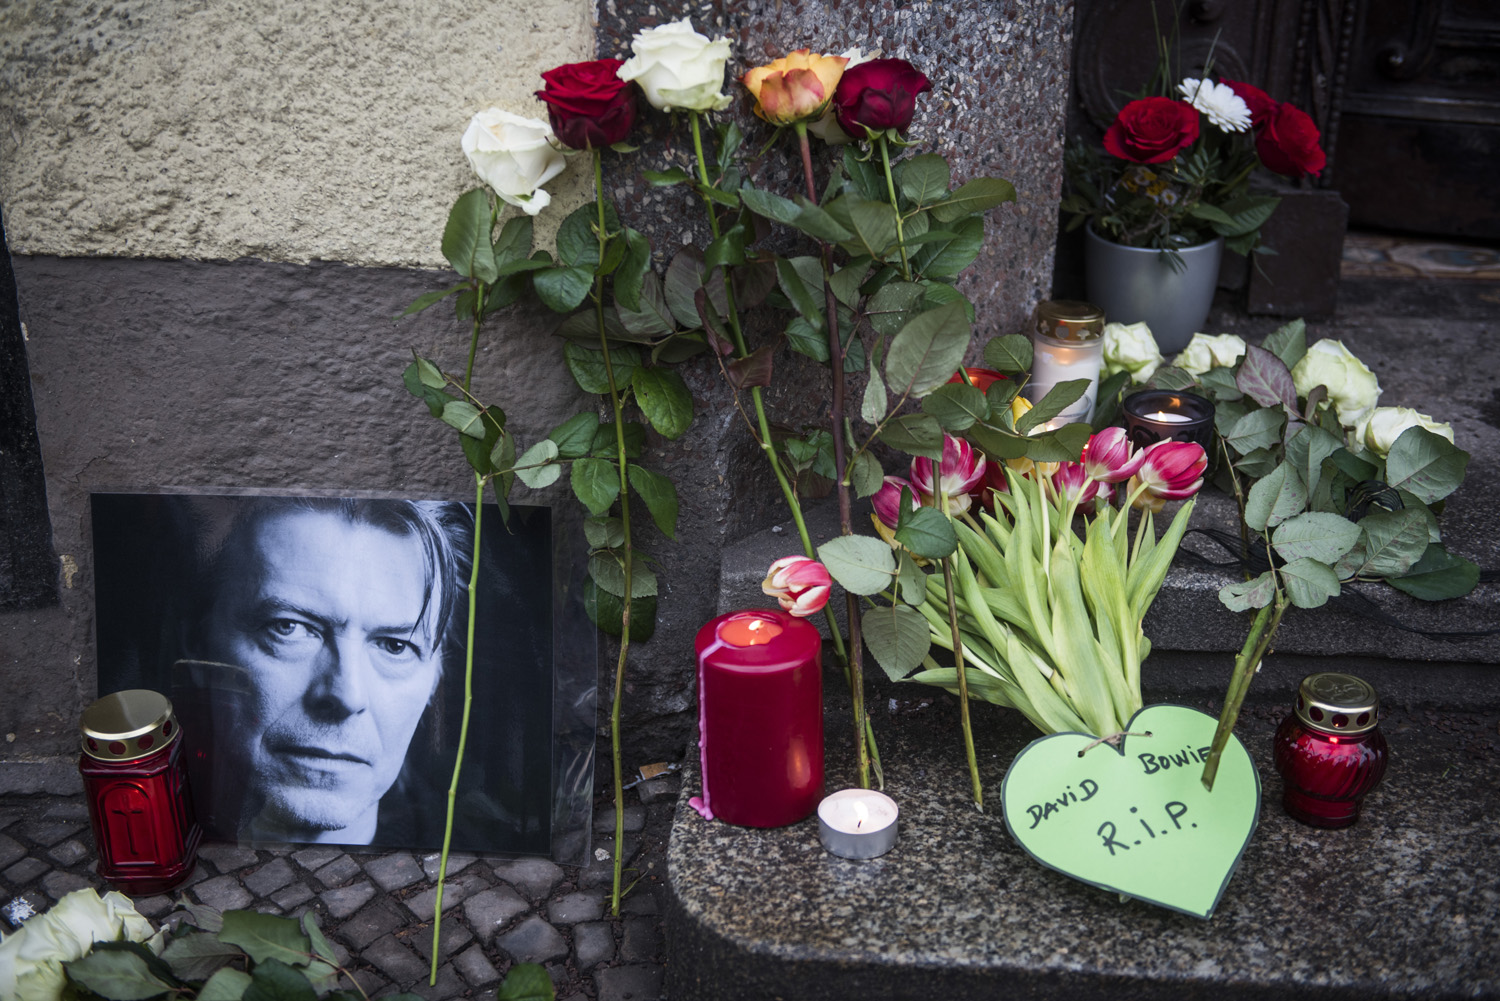 Tributes to British rock legend David Bowie are seen outside his former home in Berlin's Hauptstrasse 155 on January 11, 2016. British rock music legend David Bowie has died after a long battle with cancer, his official Twitter and Facebook accounts said. / AFP / ODD ANDERSEN